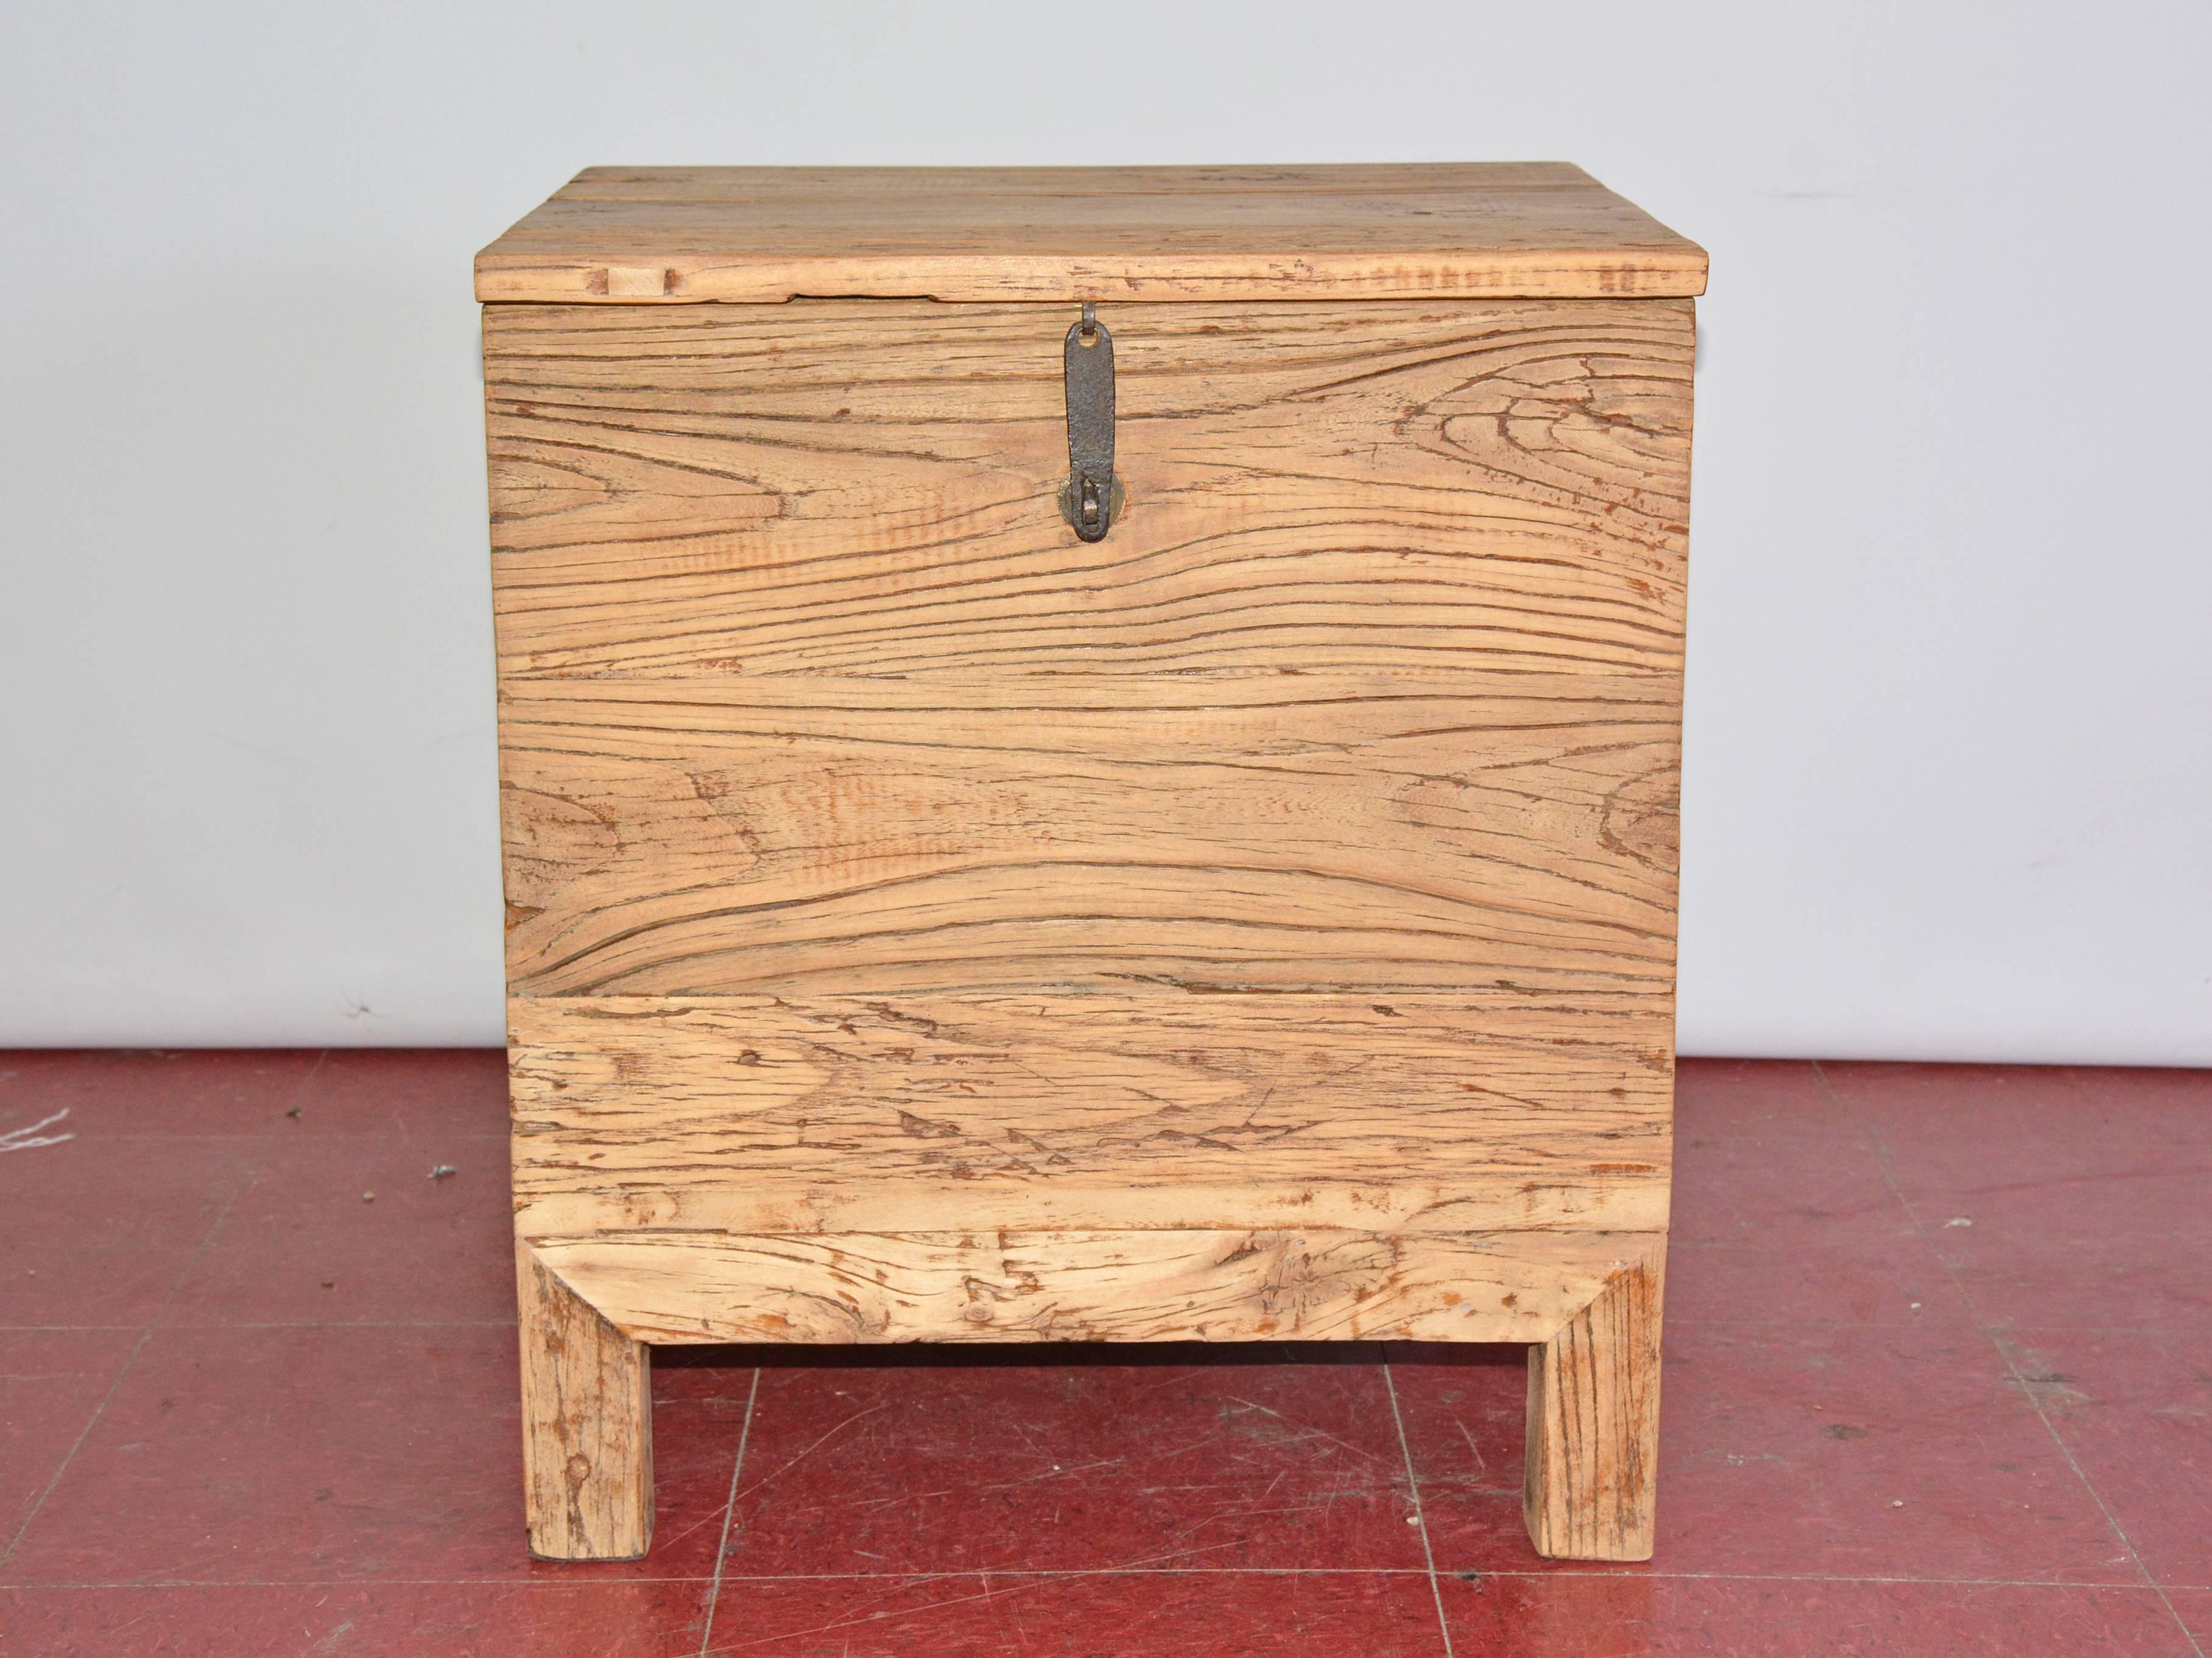 The Chinese lidded storage box works well as a side or night table having full storage capacity. Approximately two-thirds of the depth of the top is a removable lid that has an iron latch and loop for a padlock. Two protruding arms at the back of